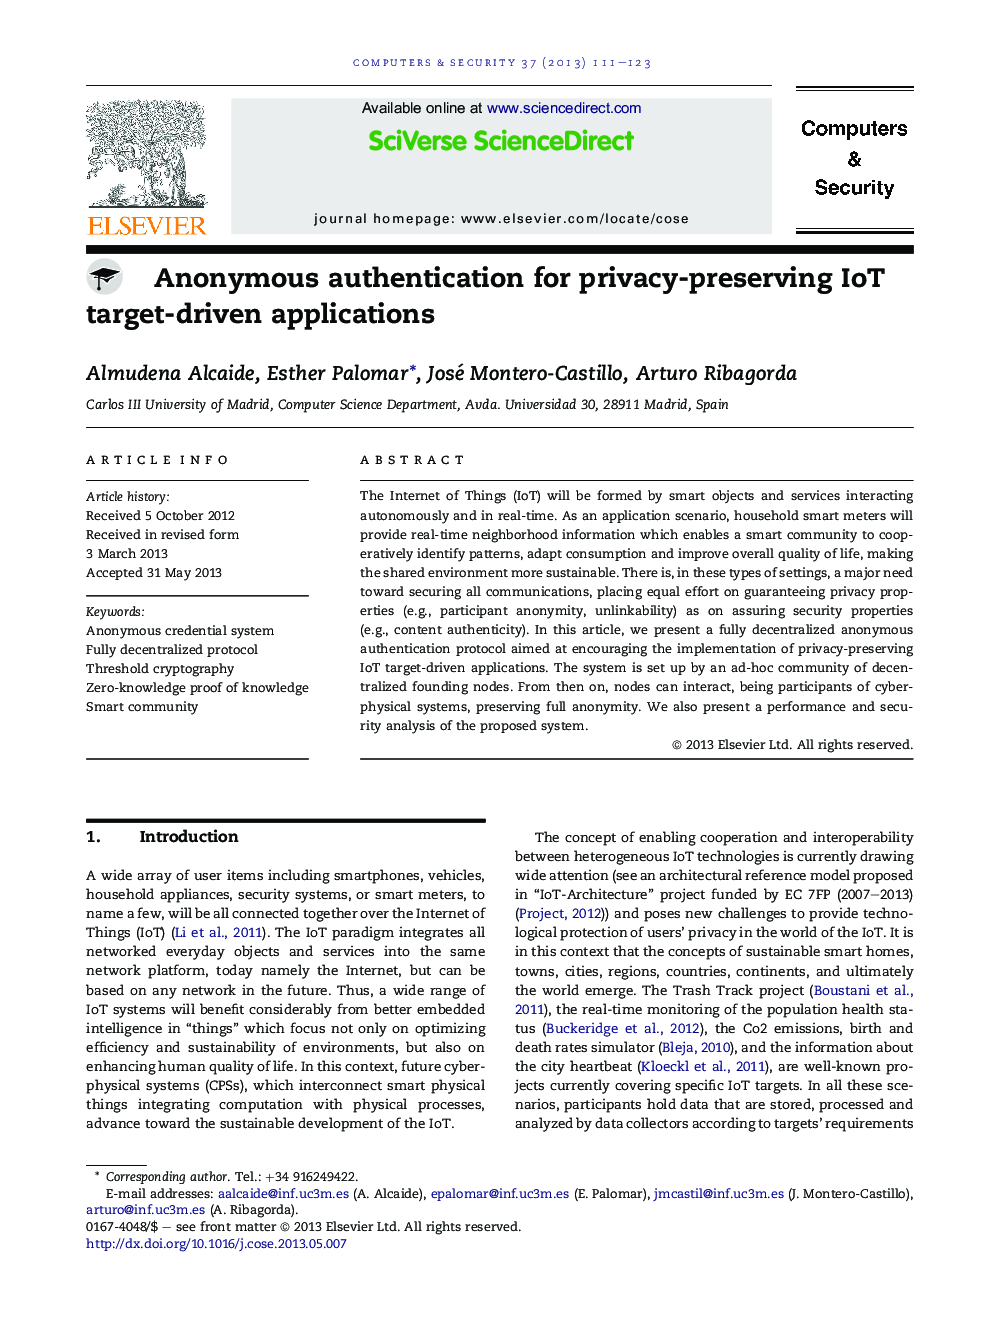 Anonymous authentication for privacy-preserving IoT target-driven applications